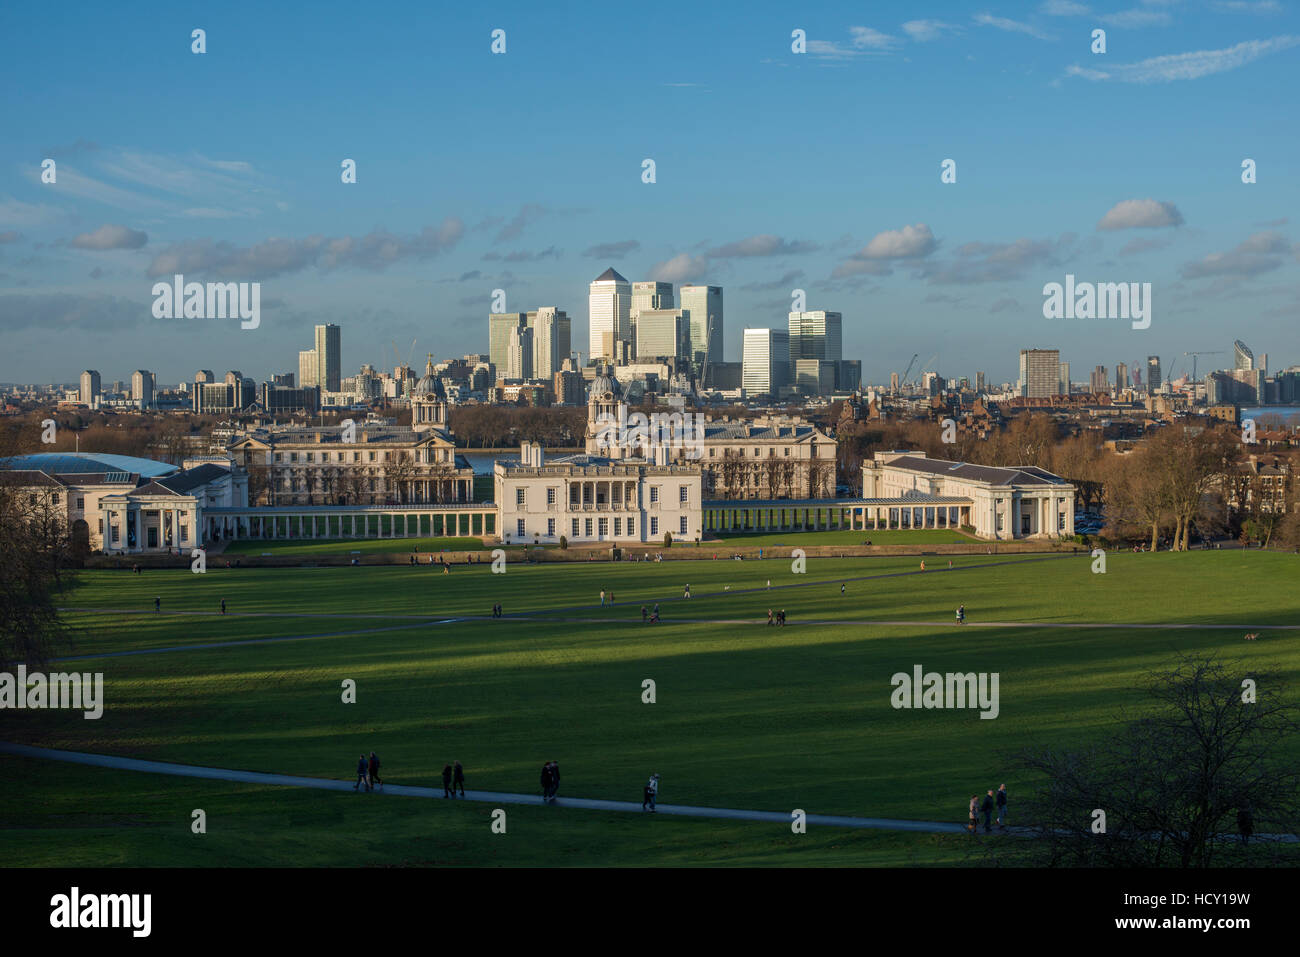 Looking towards Canary Wharf and the Isle of Dogs, Docklands, from the Royal Observatory in Greenwich, London, UK Stock Photo